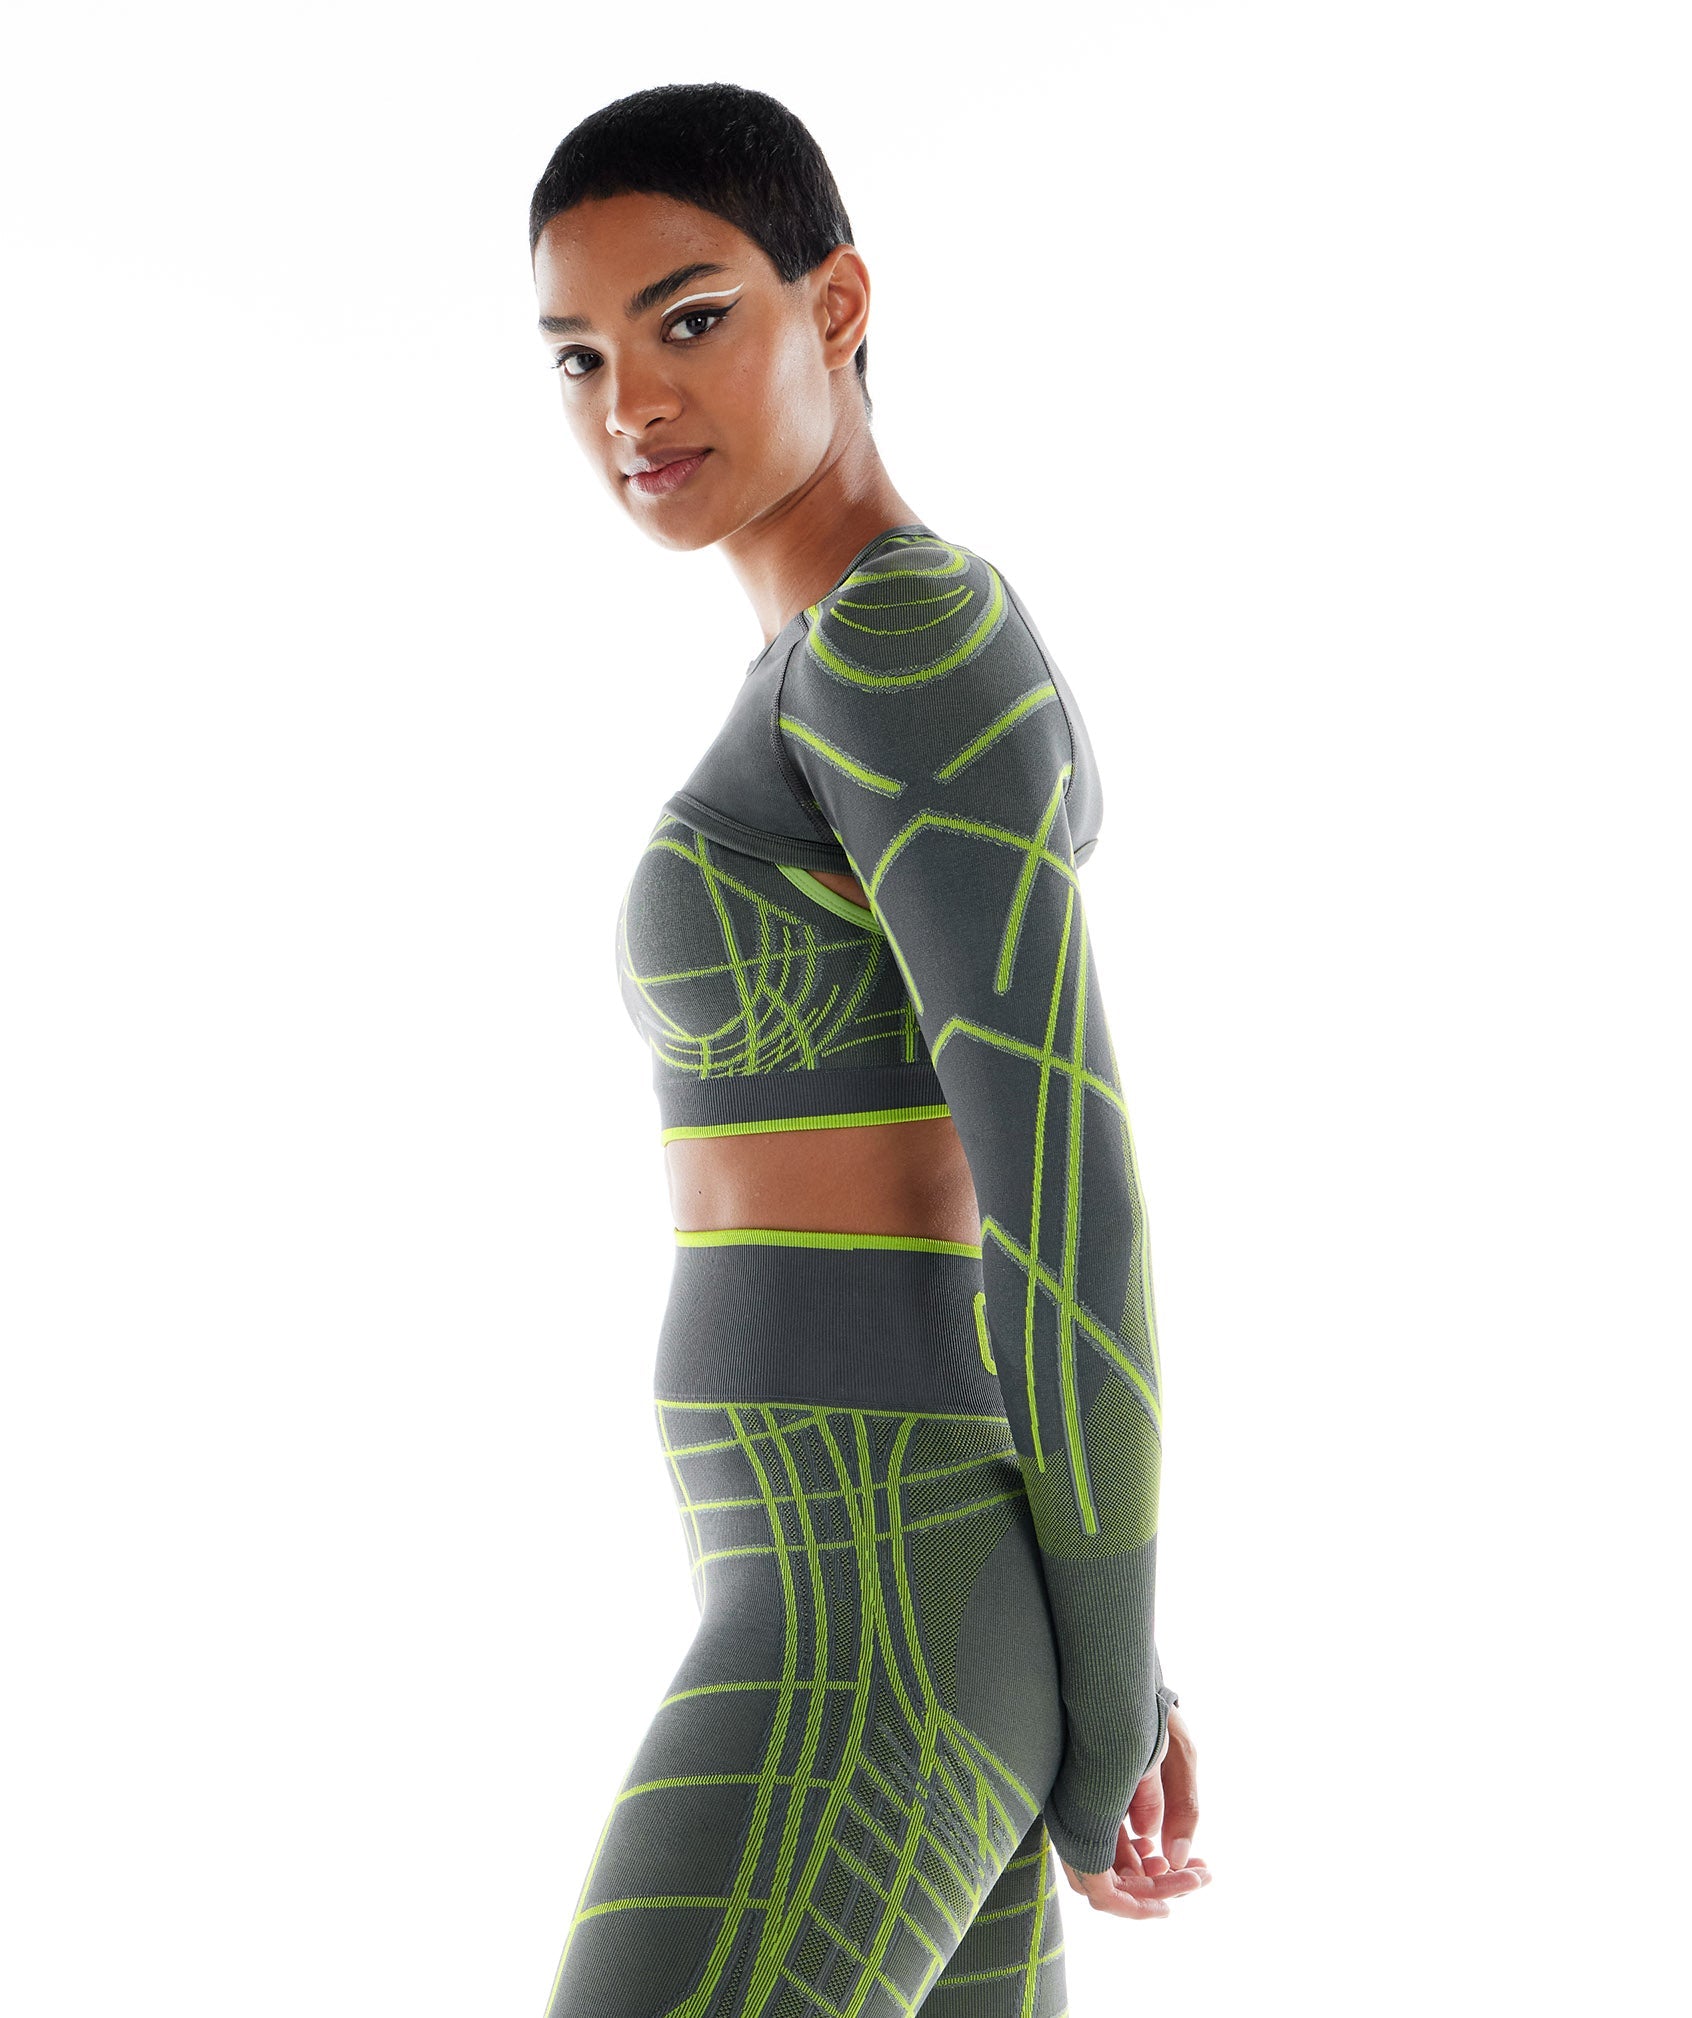 Wtflex Linear Seamless Long Sleeve Shrug in  Charcoal Grey/Fluo Green/Light Grey - view 3